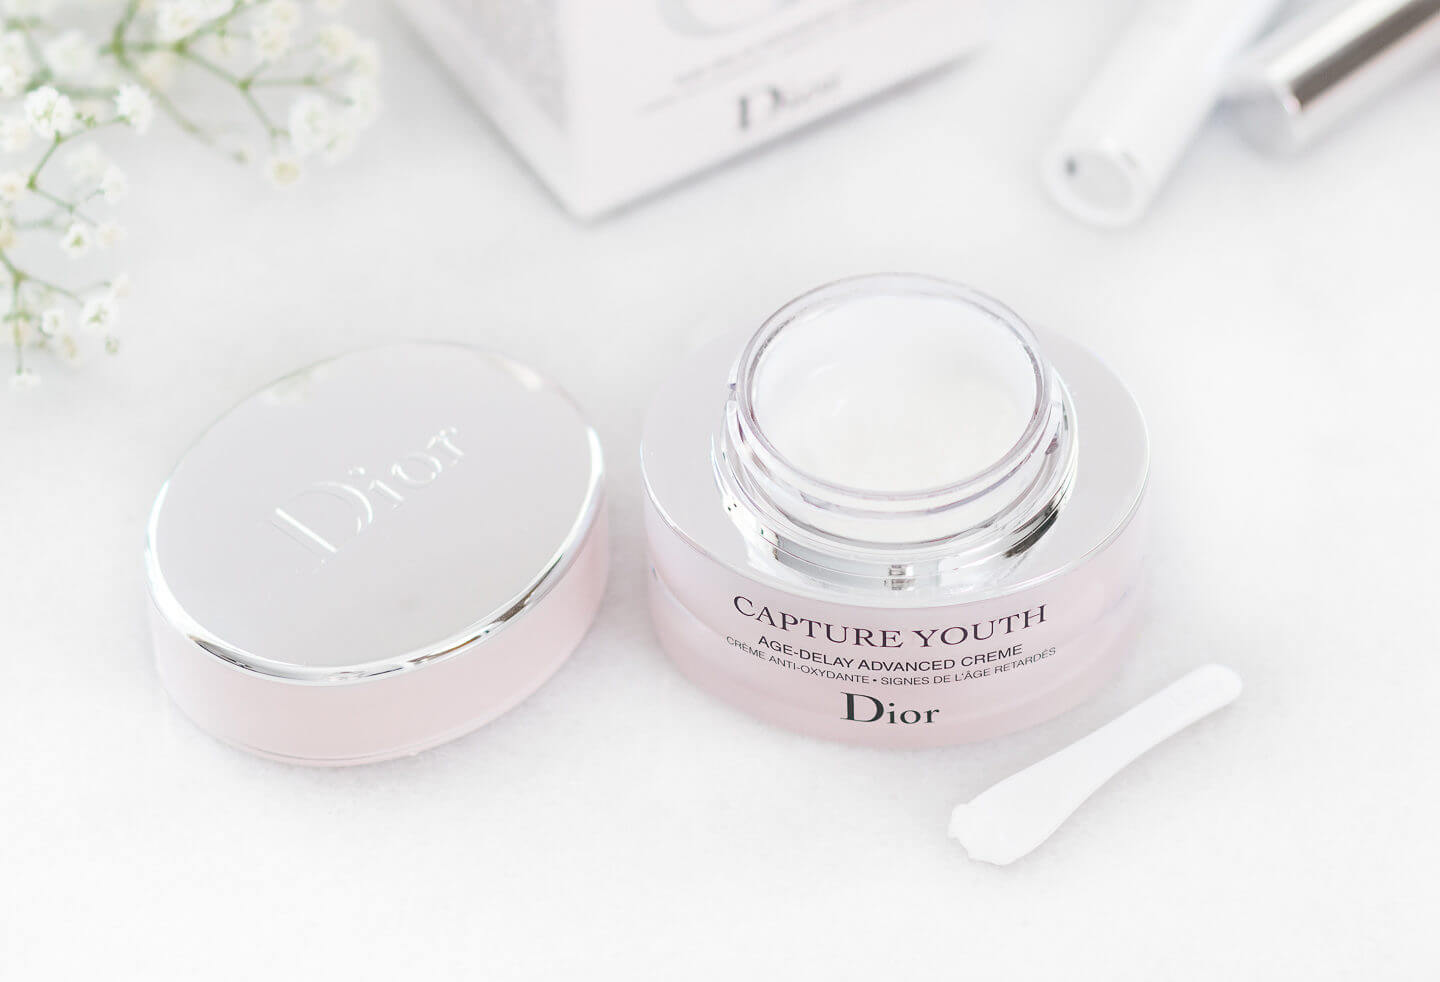 Dior , Capture Youth  , Dior Capture Youth ,  Age-Delay Advanced ,  Advanced Crème , Dior Advanced Crème